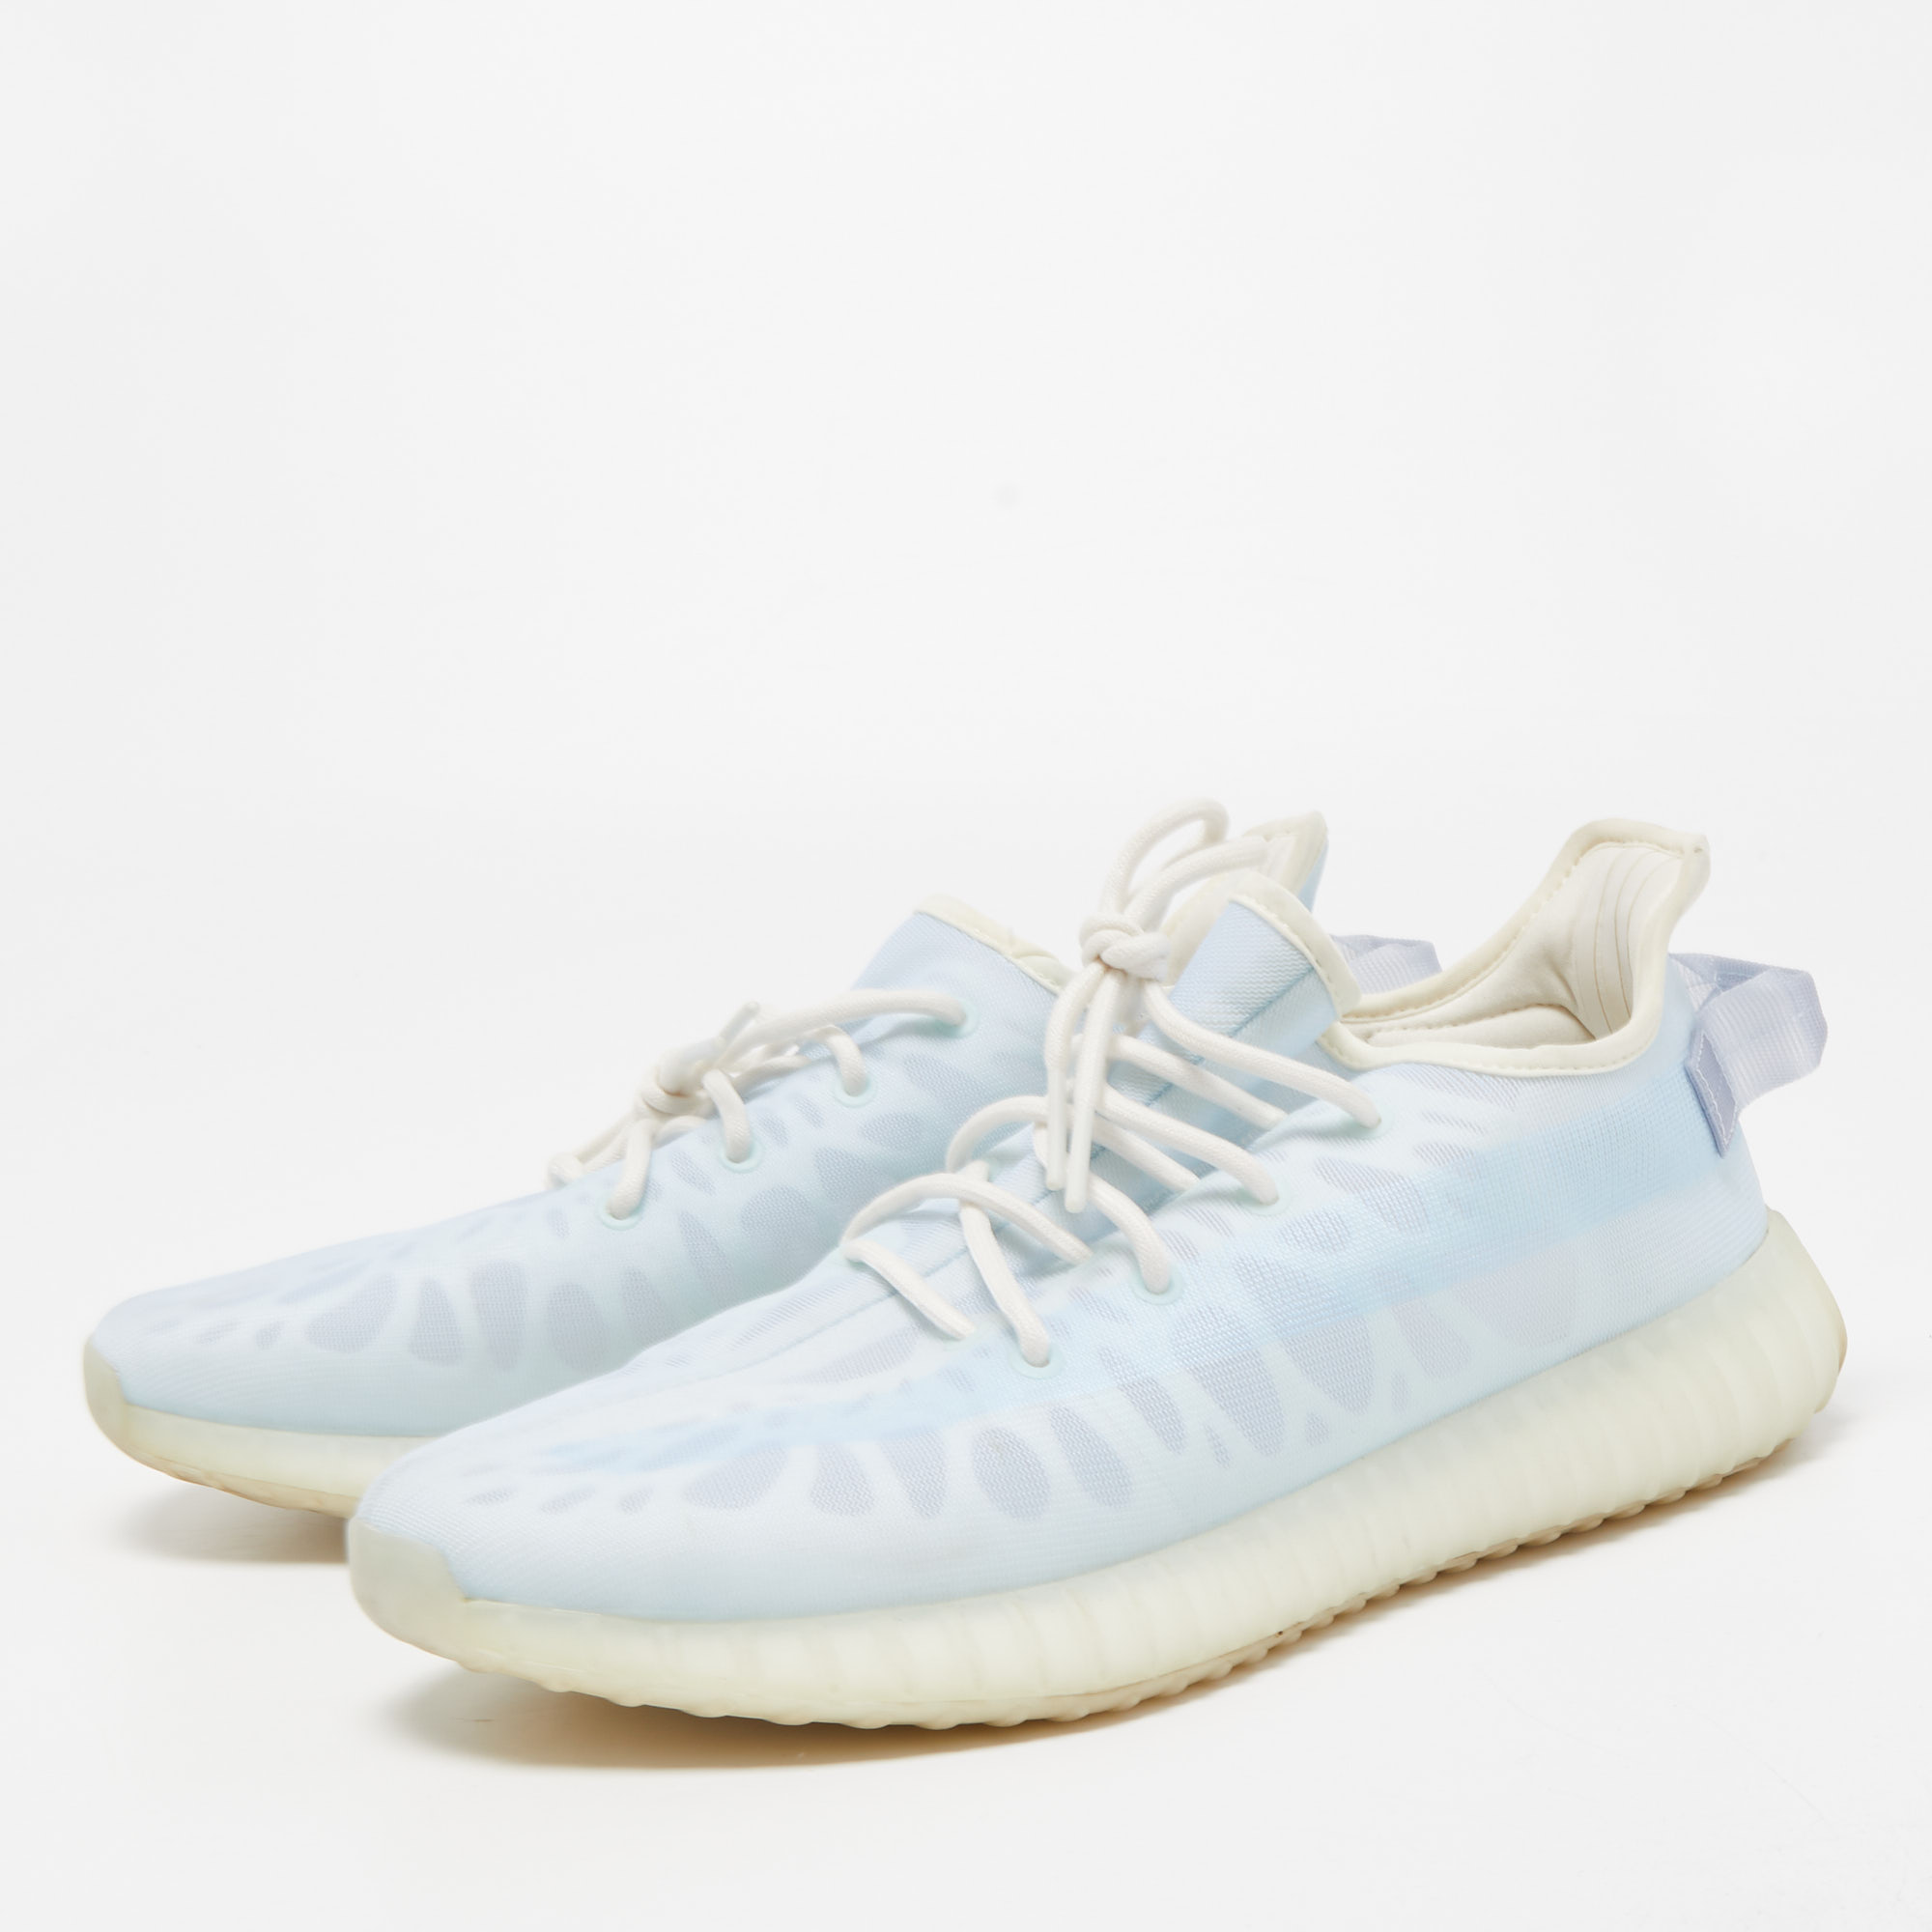 

Yeezy x Adidas Light Blue Mesh Boost 350 V2 Mono Ice Sneakers Size 46 2/3